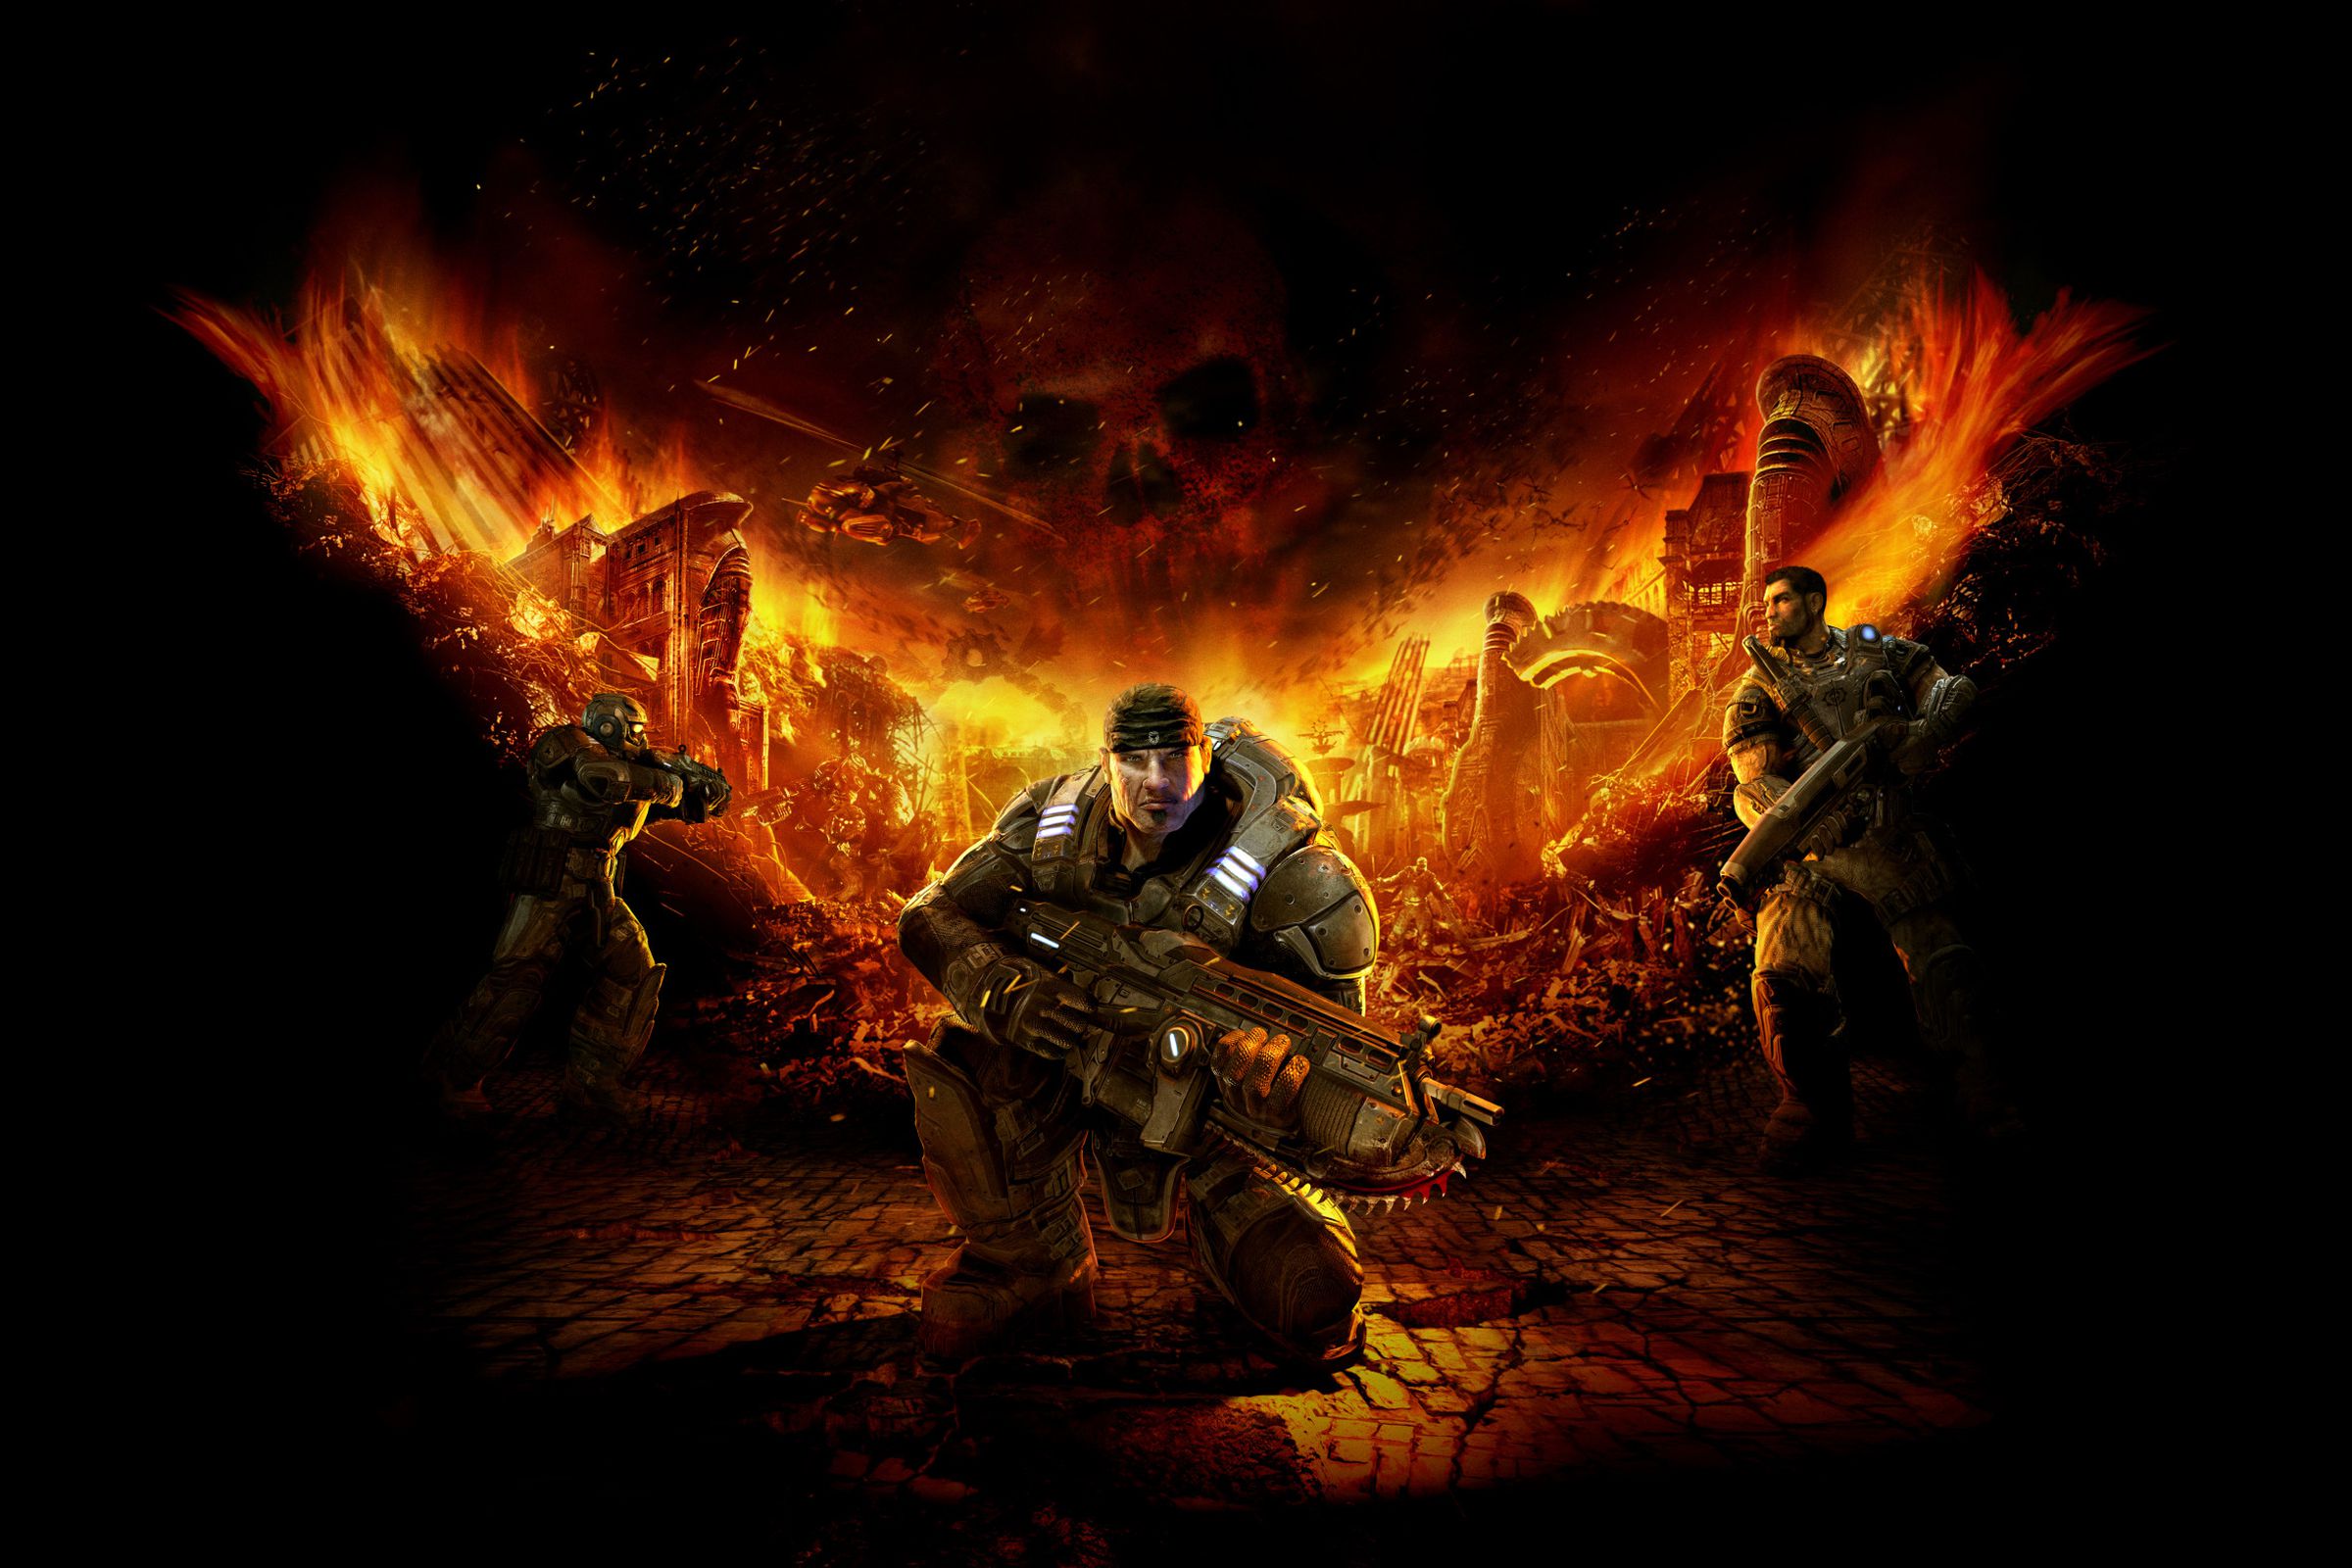 Promotional art featuring three Gears of War characters.